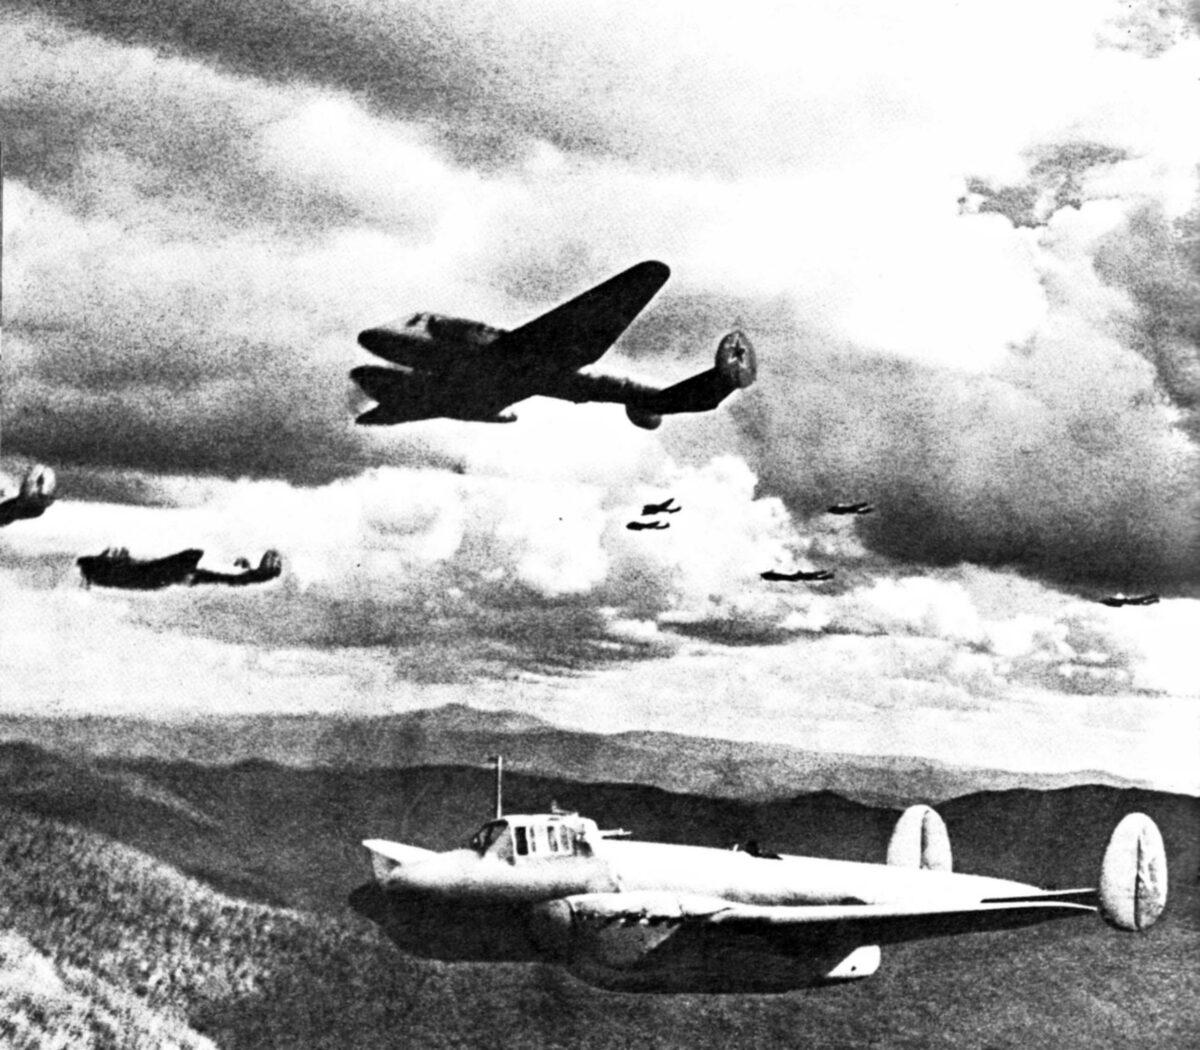 Petlyakov Pe-2 dive bombers of the 1st Far Eastern Front of the Red Army